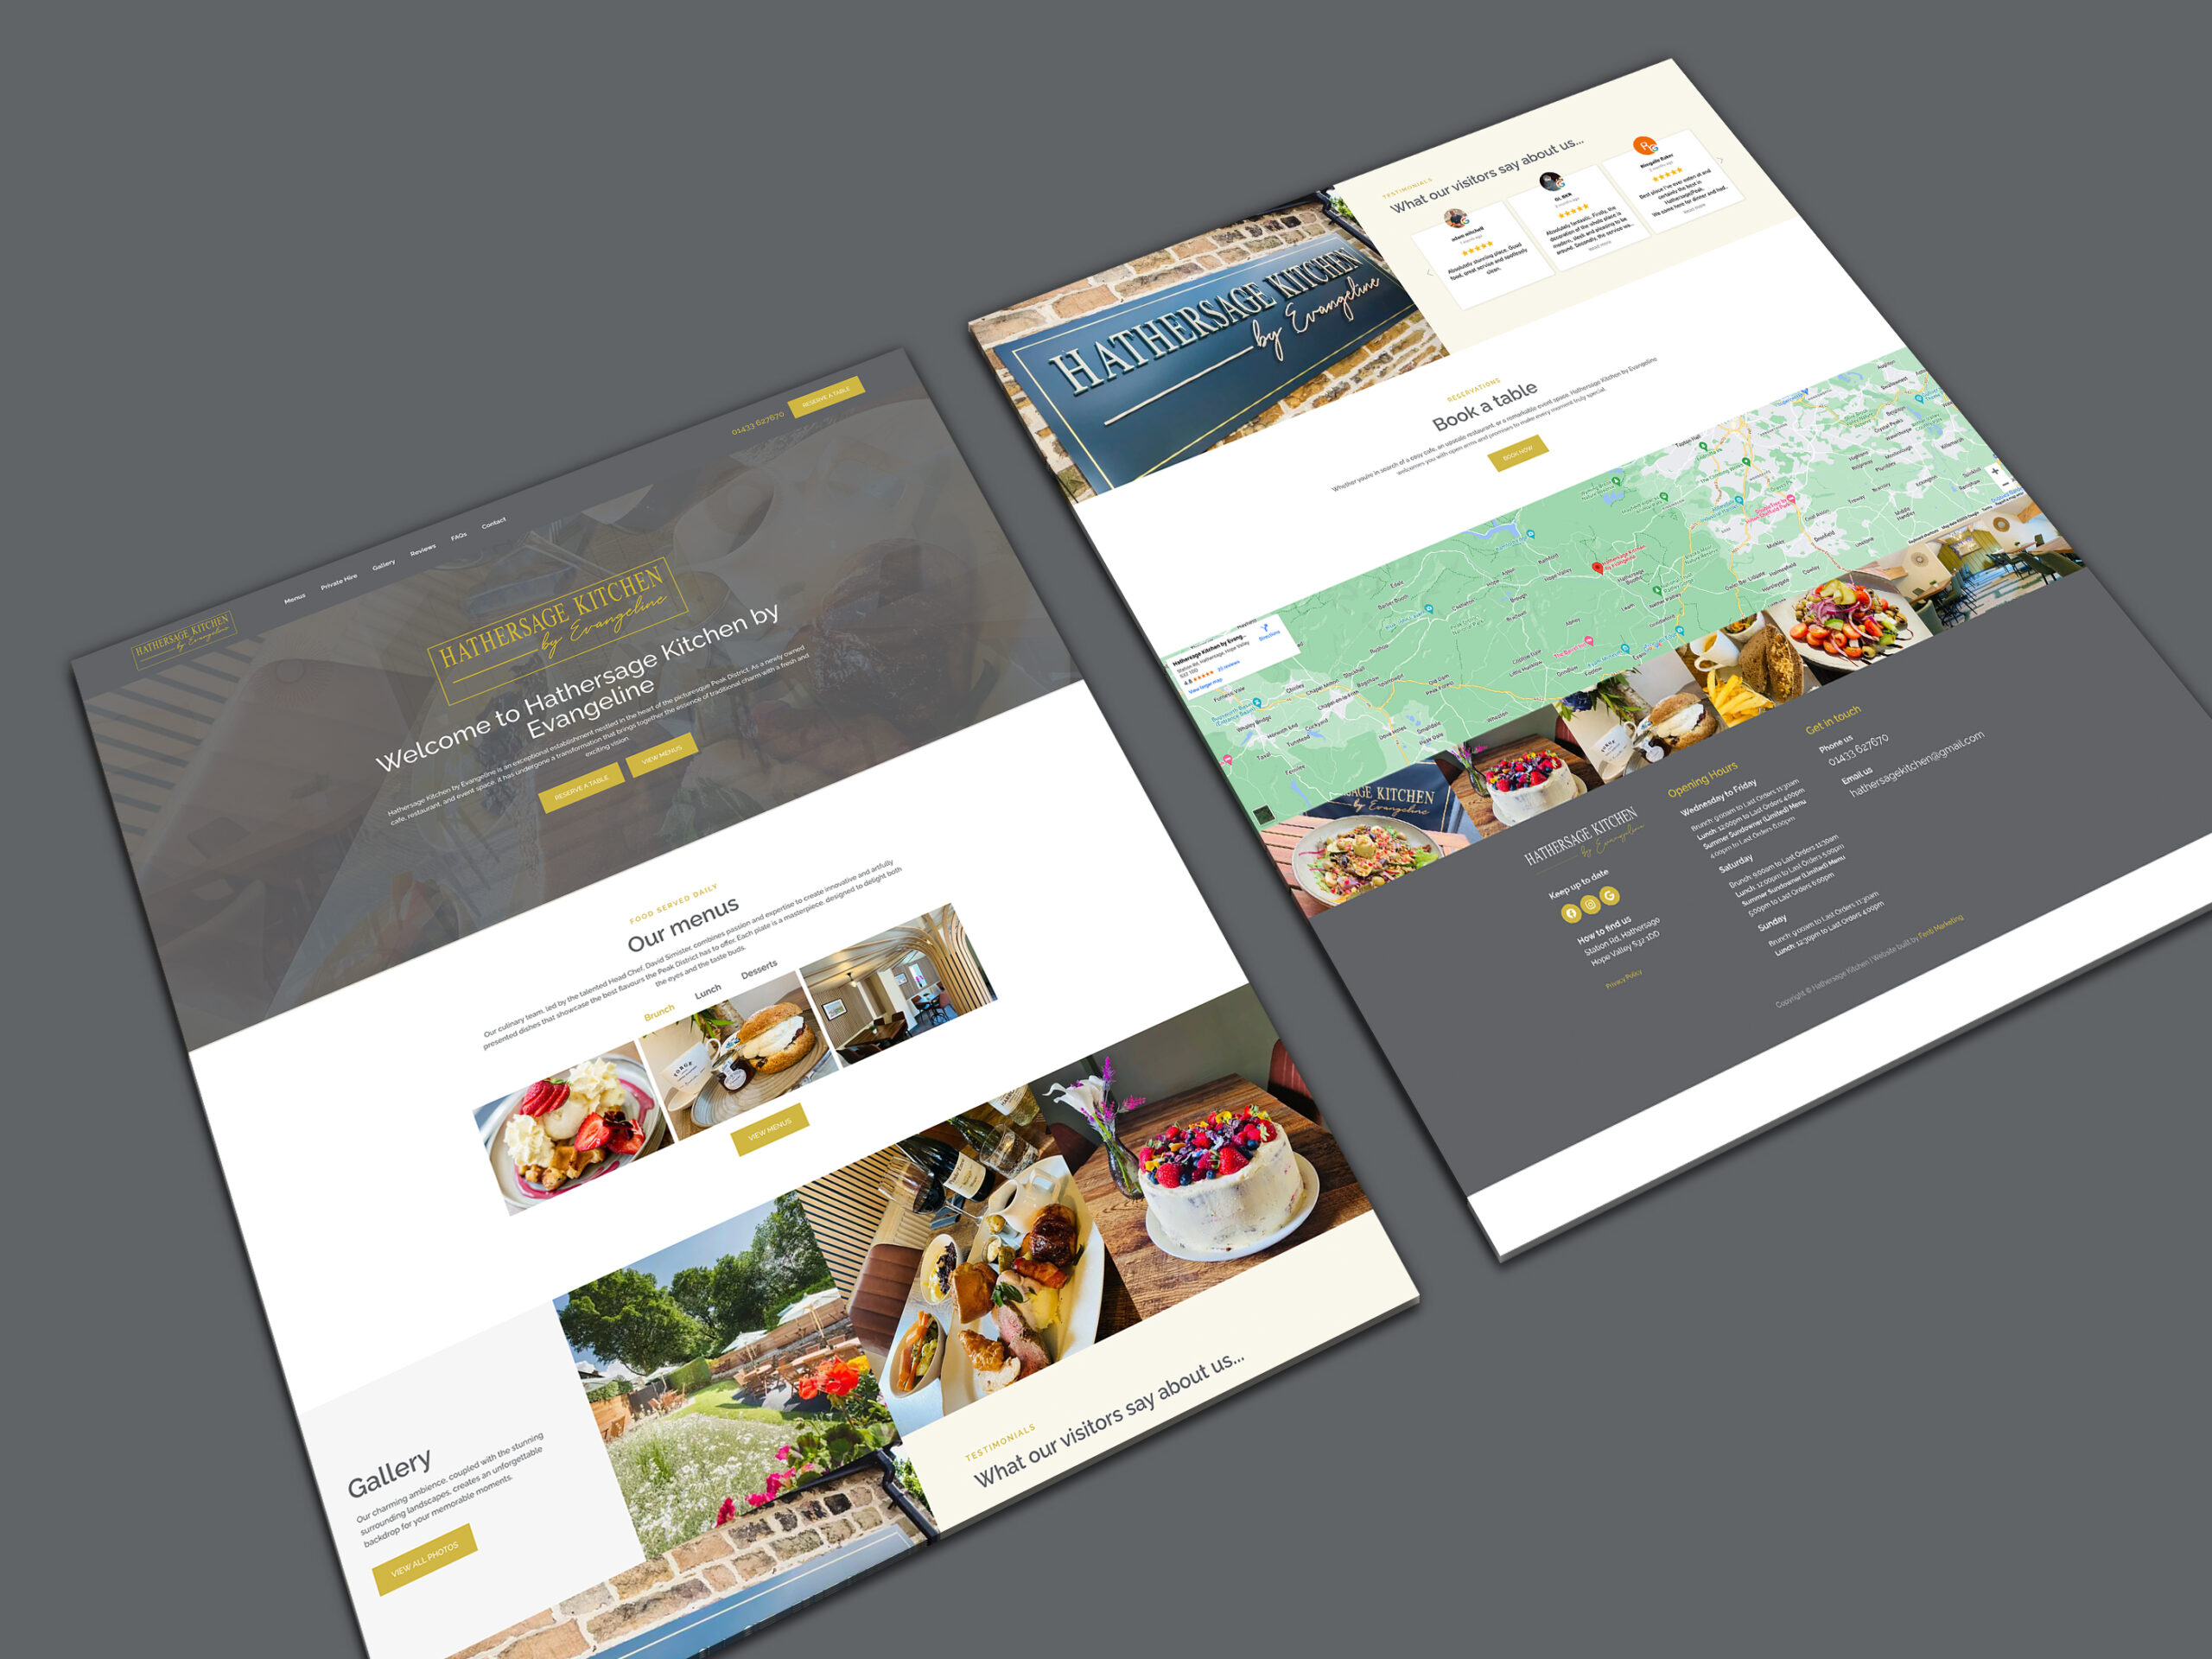 Website Design & Build for Hathersage Kitchen, Cafe, Restaurant & Event Space in the heart of the Peak District - Fenti Marketing